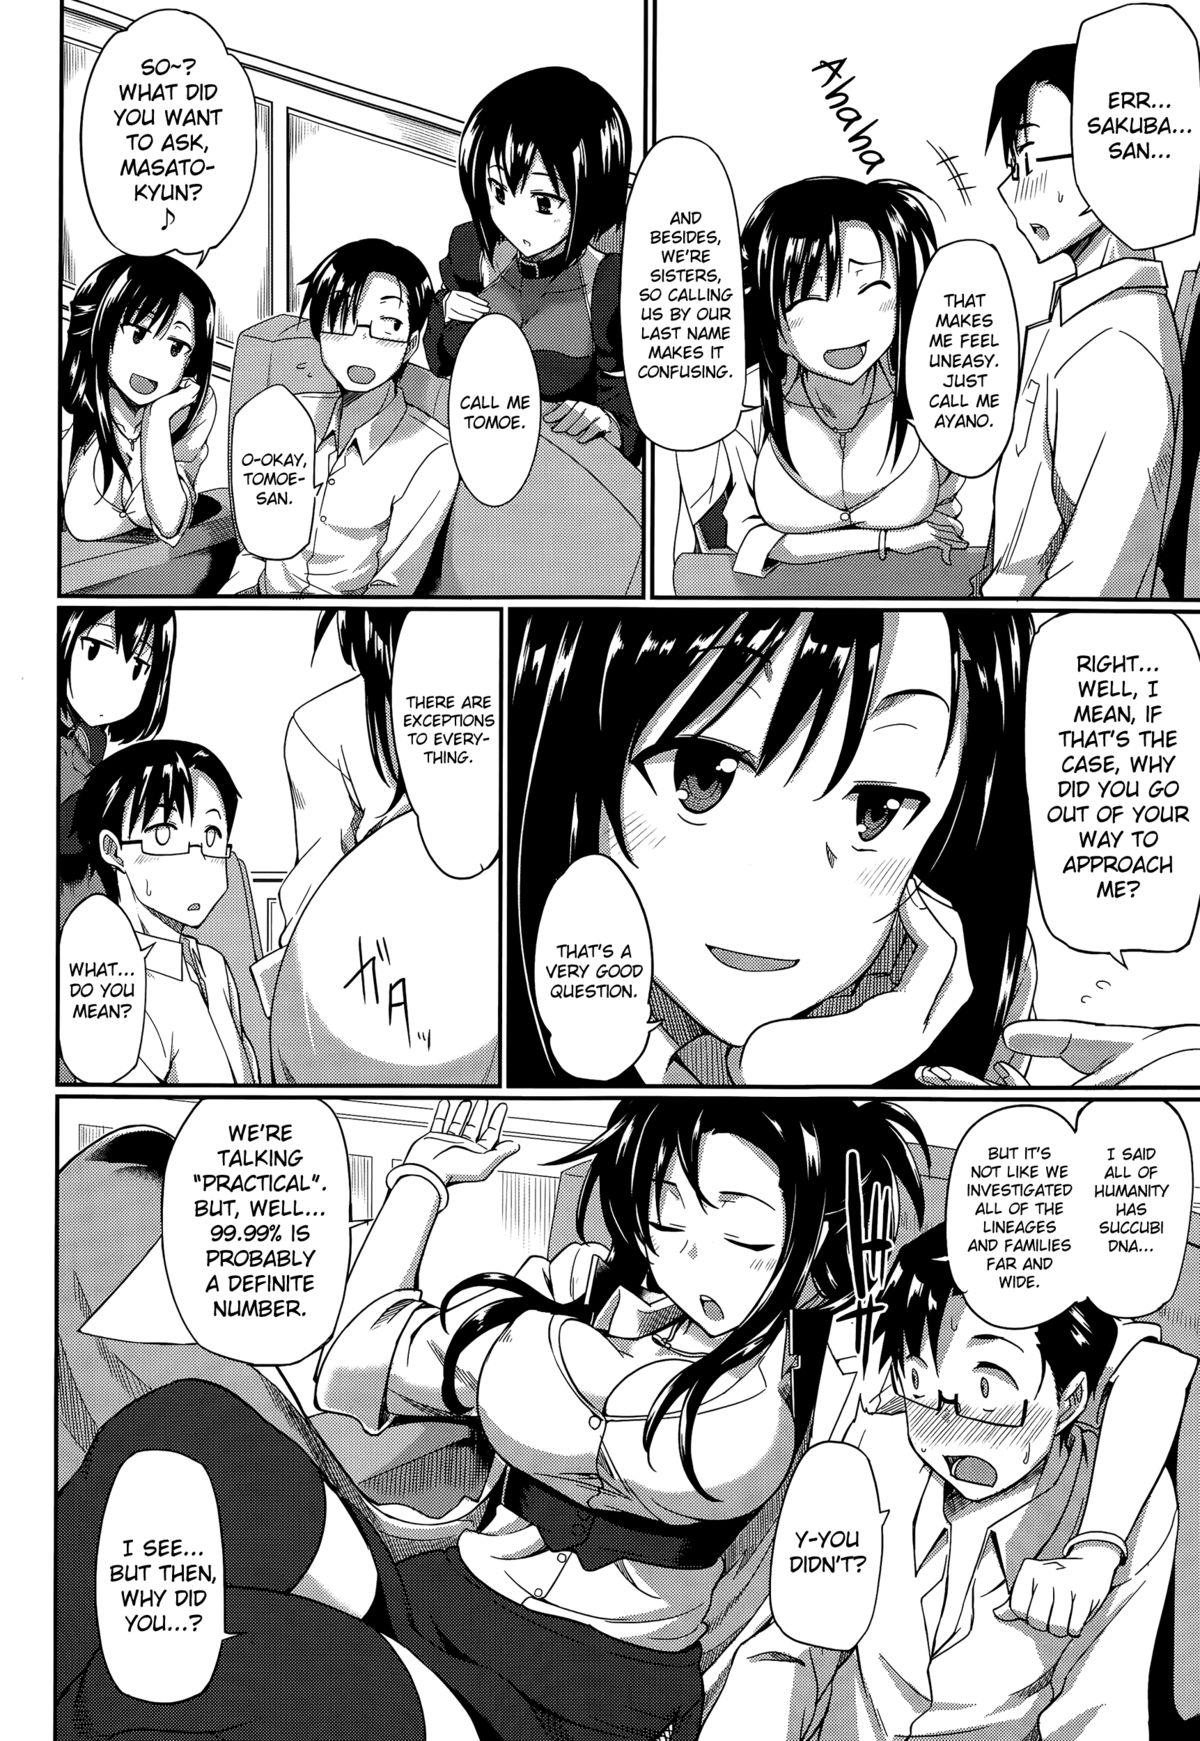 Pervert Inma no Mikata! | Succubi's Supporter! Ch. 1-2 Linda - Page 6